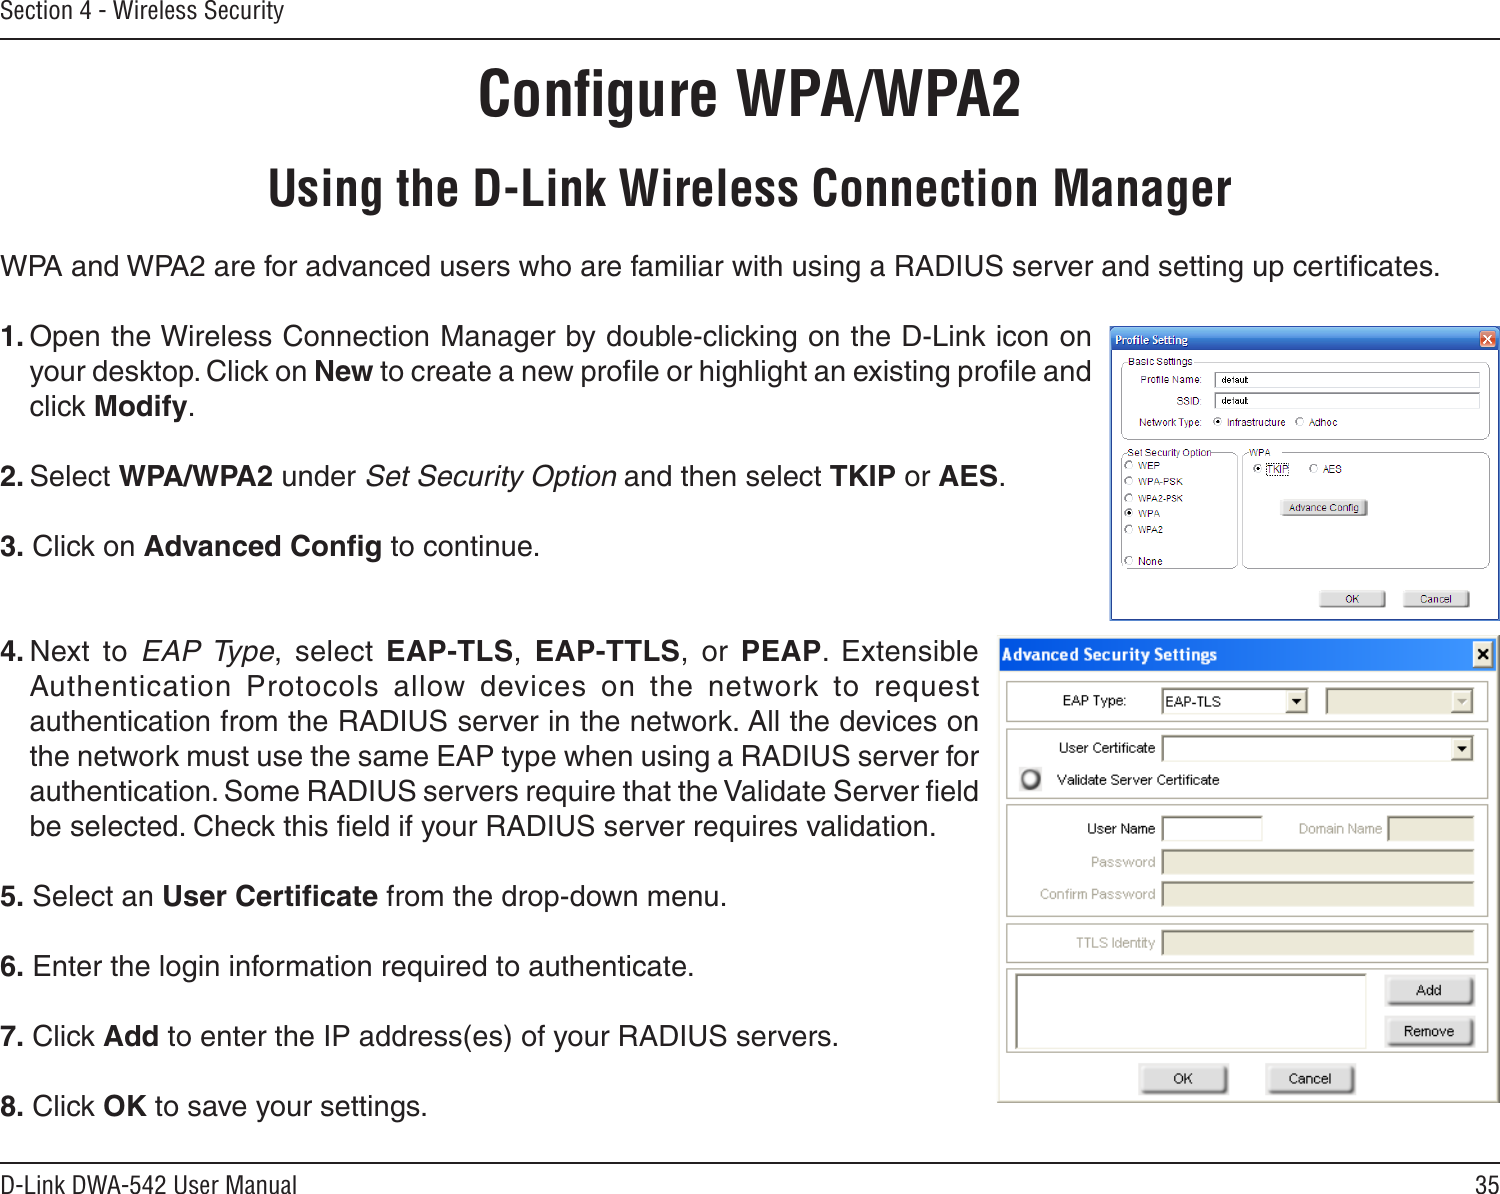 35D-Link DWA-542 User ManualSection 4 - Wireless SecurityConﬁgure WPA/WPA2Using the D-Link Wireless Connection ManagerWPA and WPA2 are for advanced users who are familiar with using a RADIUS server and setting up certiﬁcates.1. Open the Wireless Connection Manager by double-clicking on the D-Link icon on your desktop. Click on New to create a new proﬁle or highlight an existing proﬁle and click Modify. 2. Select WPA/WPA2 under Set Security Option and then select TKIP or AES.3. Click on Advanced Conﬁg to continue.4. Next  to  EAP Type,  select  EAP-TLS,  EAP-TTLS,  or  PEAP.  Extensible Authentication  Protocols  allow  devices  on  the  network  to  request authentication from the RADIUS server in the network. All the devices on the network must use the same EAP type when using a RADIUS server for authentication. Some RADIUS servers require that the Validate Server ﬁeld be selected. Check this ﬁeld if your RADIUS server requires validation.5. Select an User Certiﬁcate from the drop-down menu.6. Enter the login information required to authenticate.7. Click Add to enter the IP address(es) of your RADIUS servers.8. Click OK to save your settings.